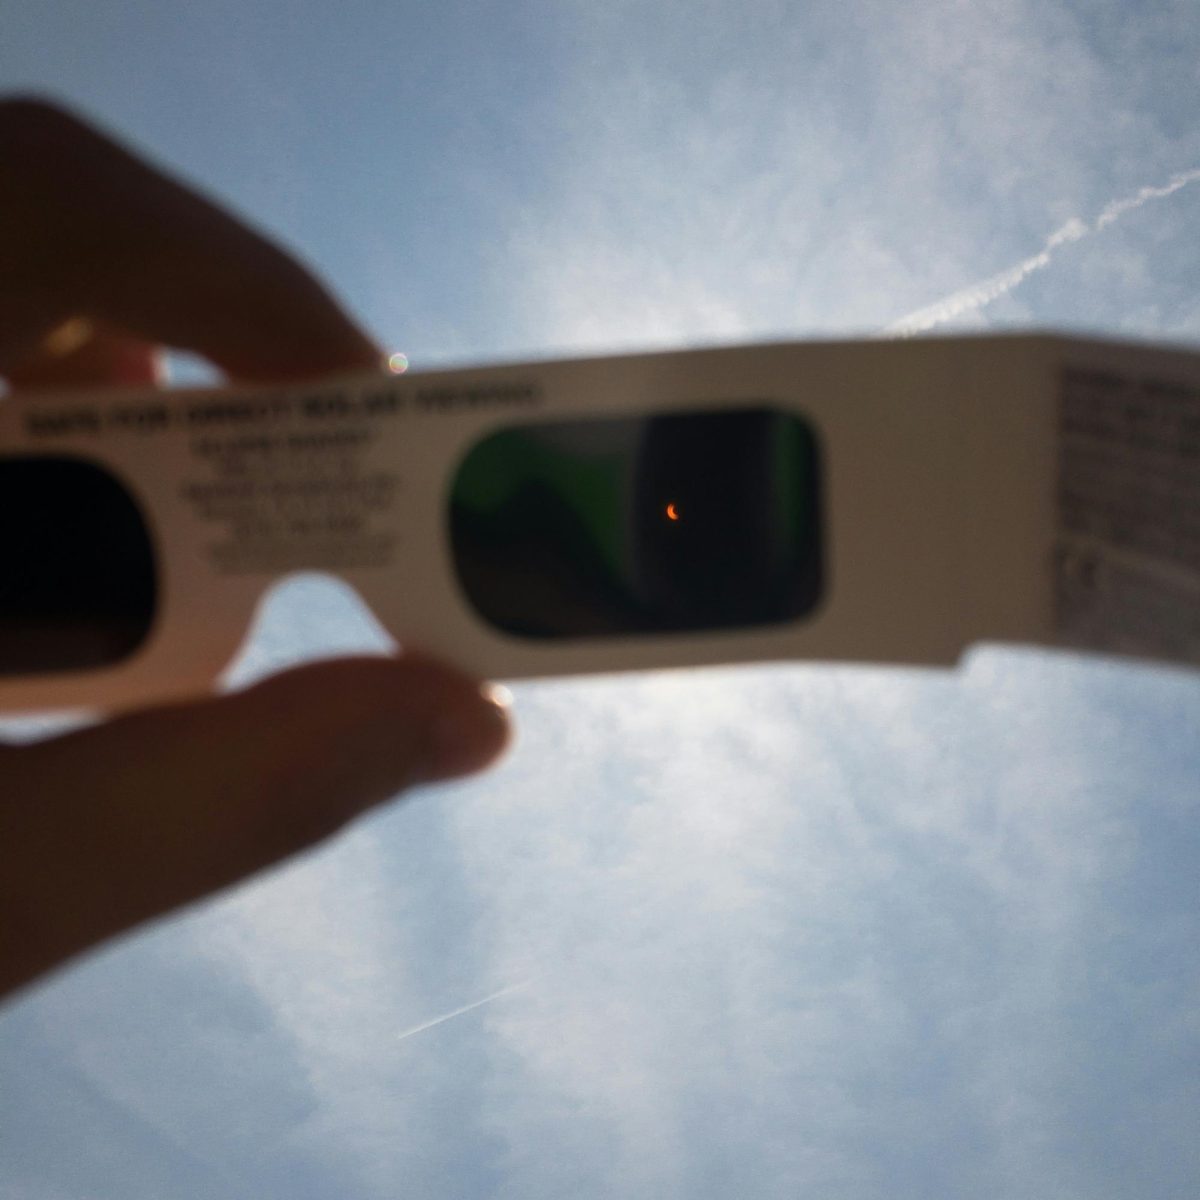 Shedding light on the eclipse: Q&A with Associate Principal Ms. Toon